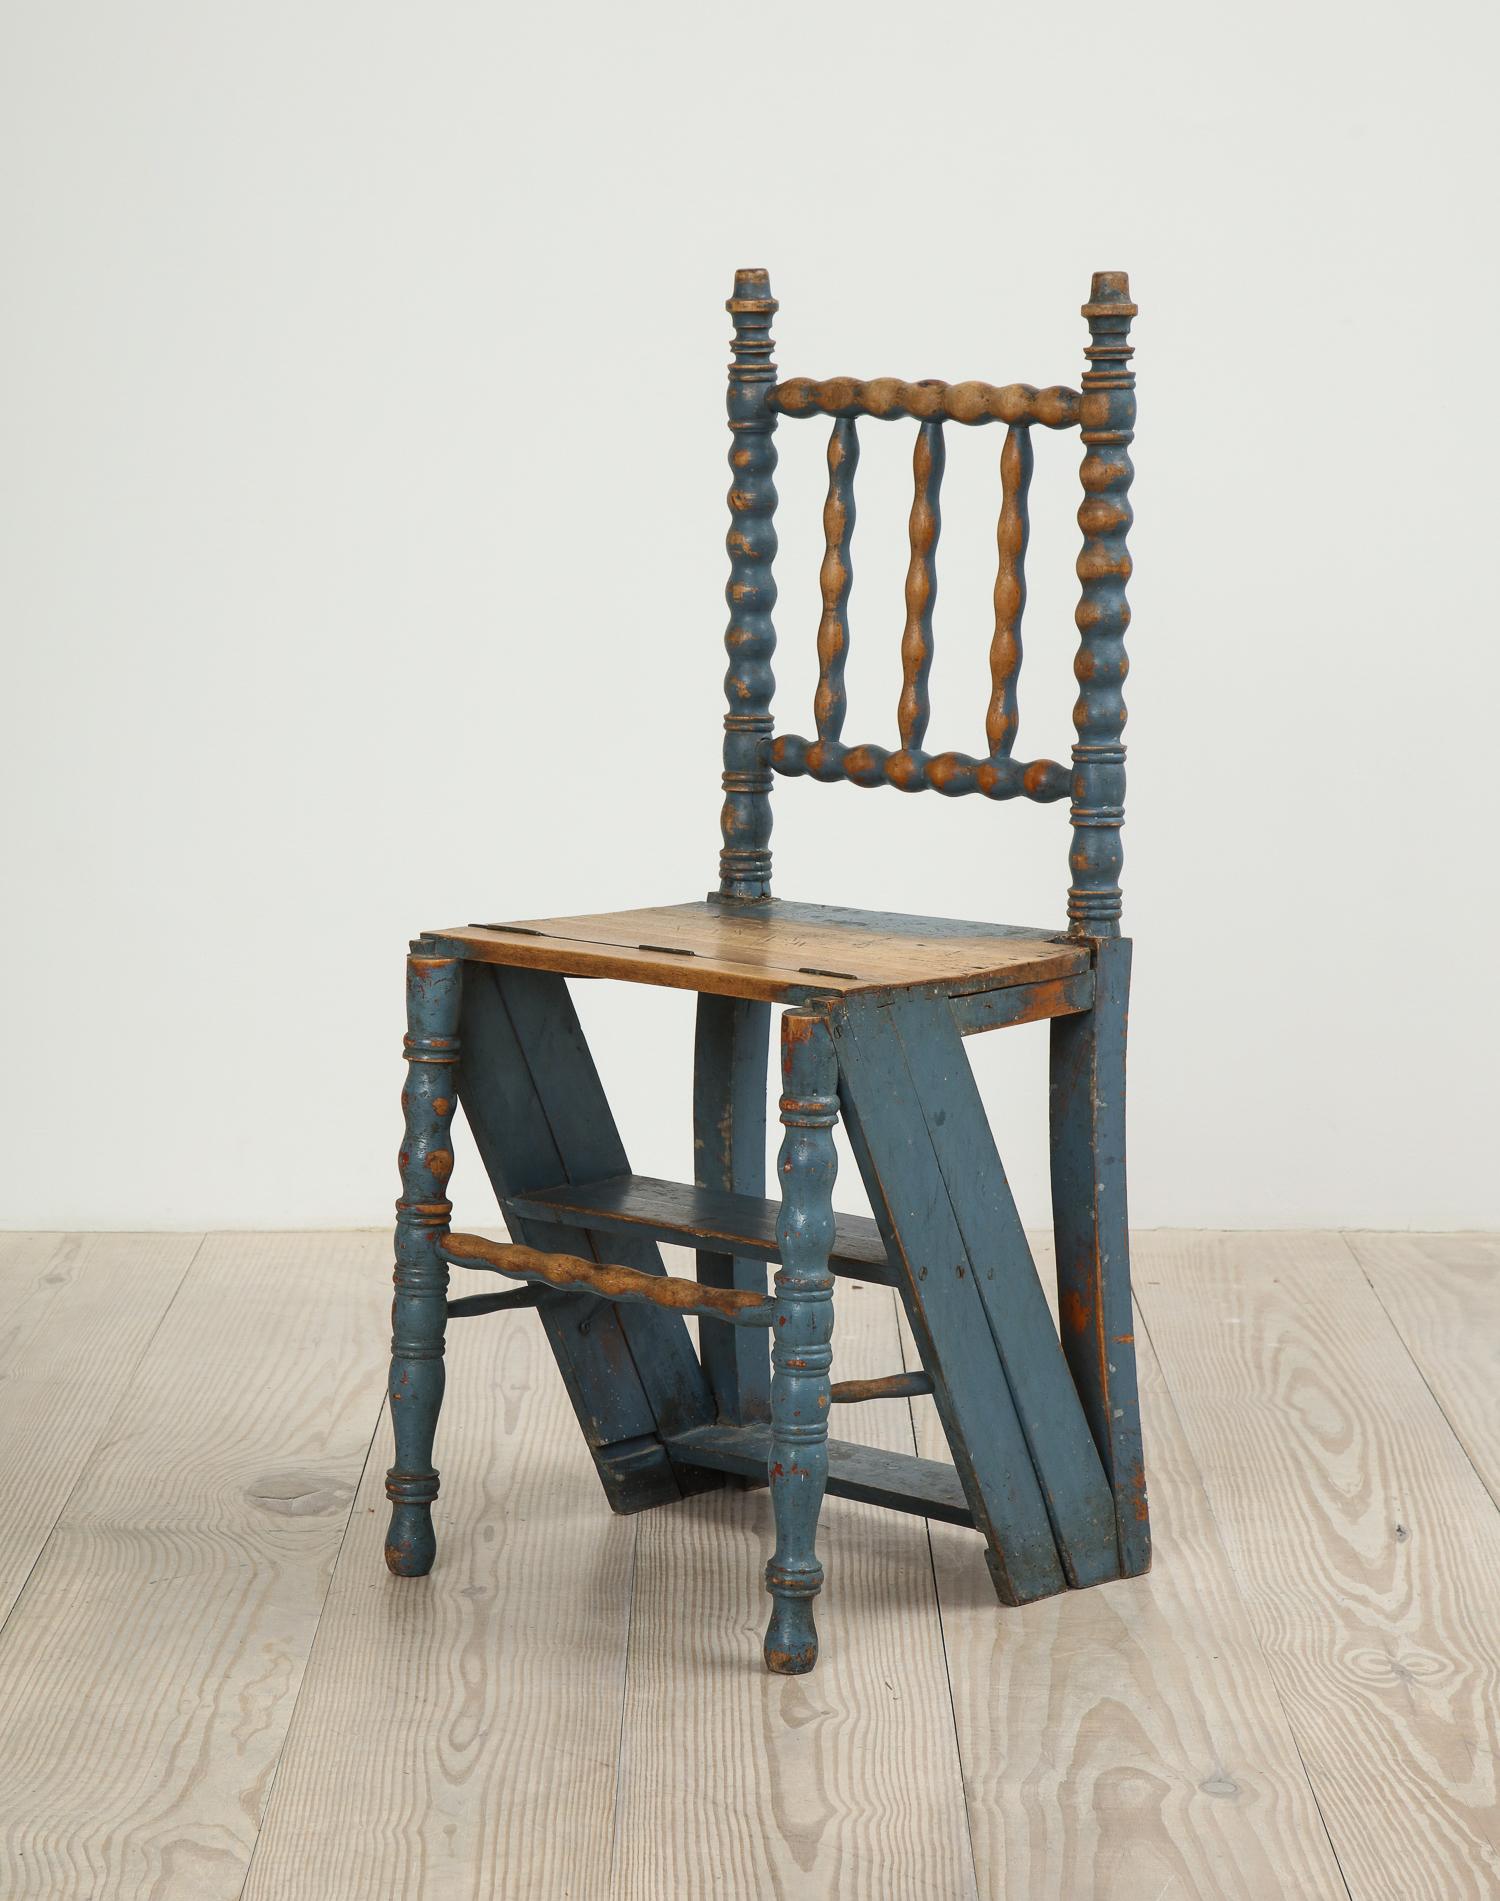 Allmoge Swedish ladder chair, origin, Sweden, circa 1820.
Multifunctional chair opens to four step ladder; all original paint.

Seat height: 48 cm 